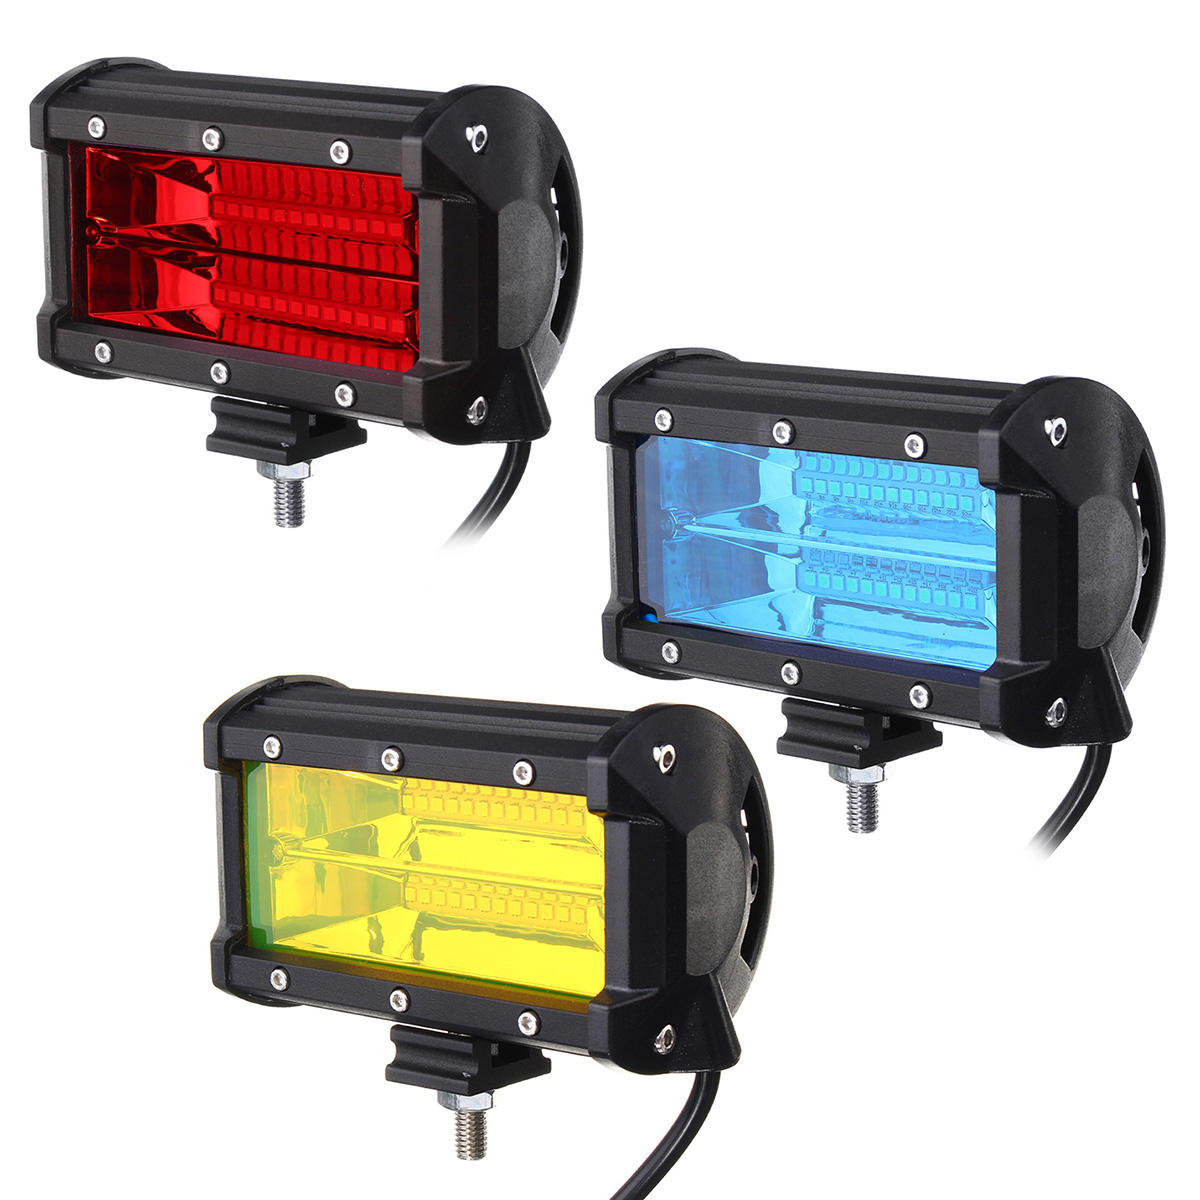 5Inch 48W 24 LED Work Light Bar Flood Beam Lamp for Car SUV Boat Driving Offroad ATV